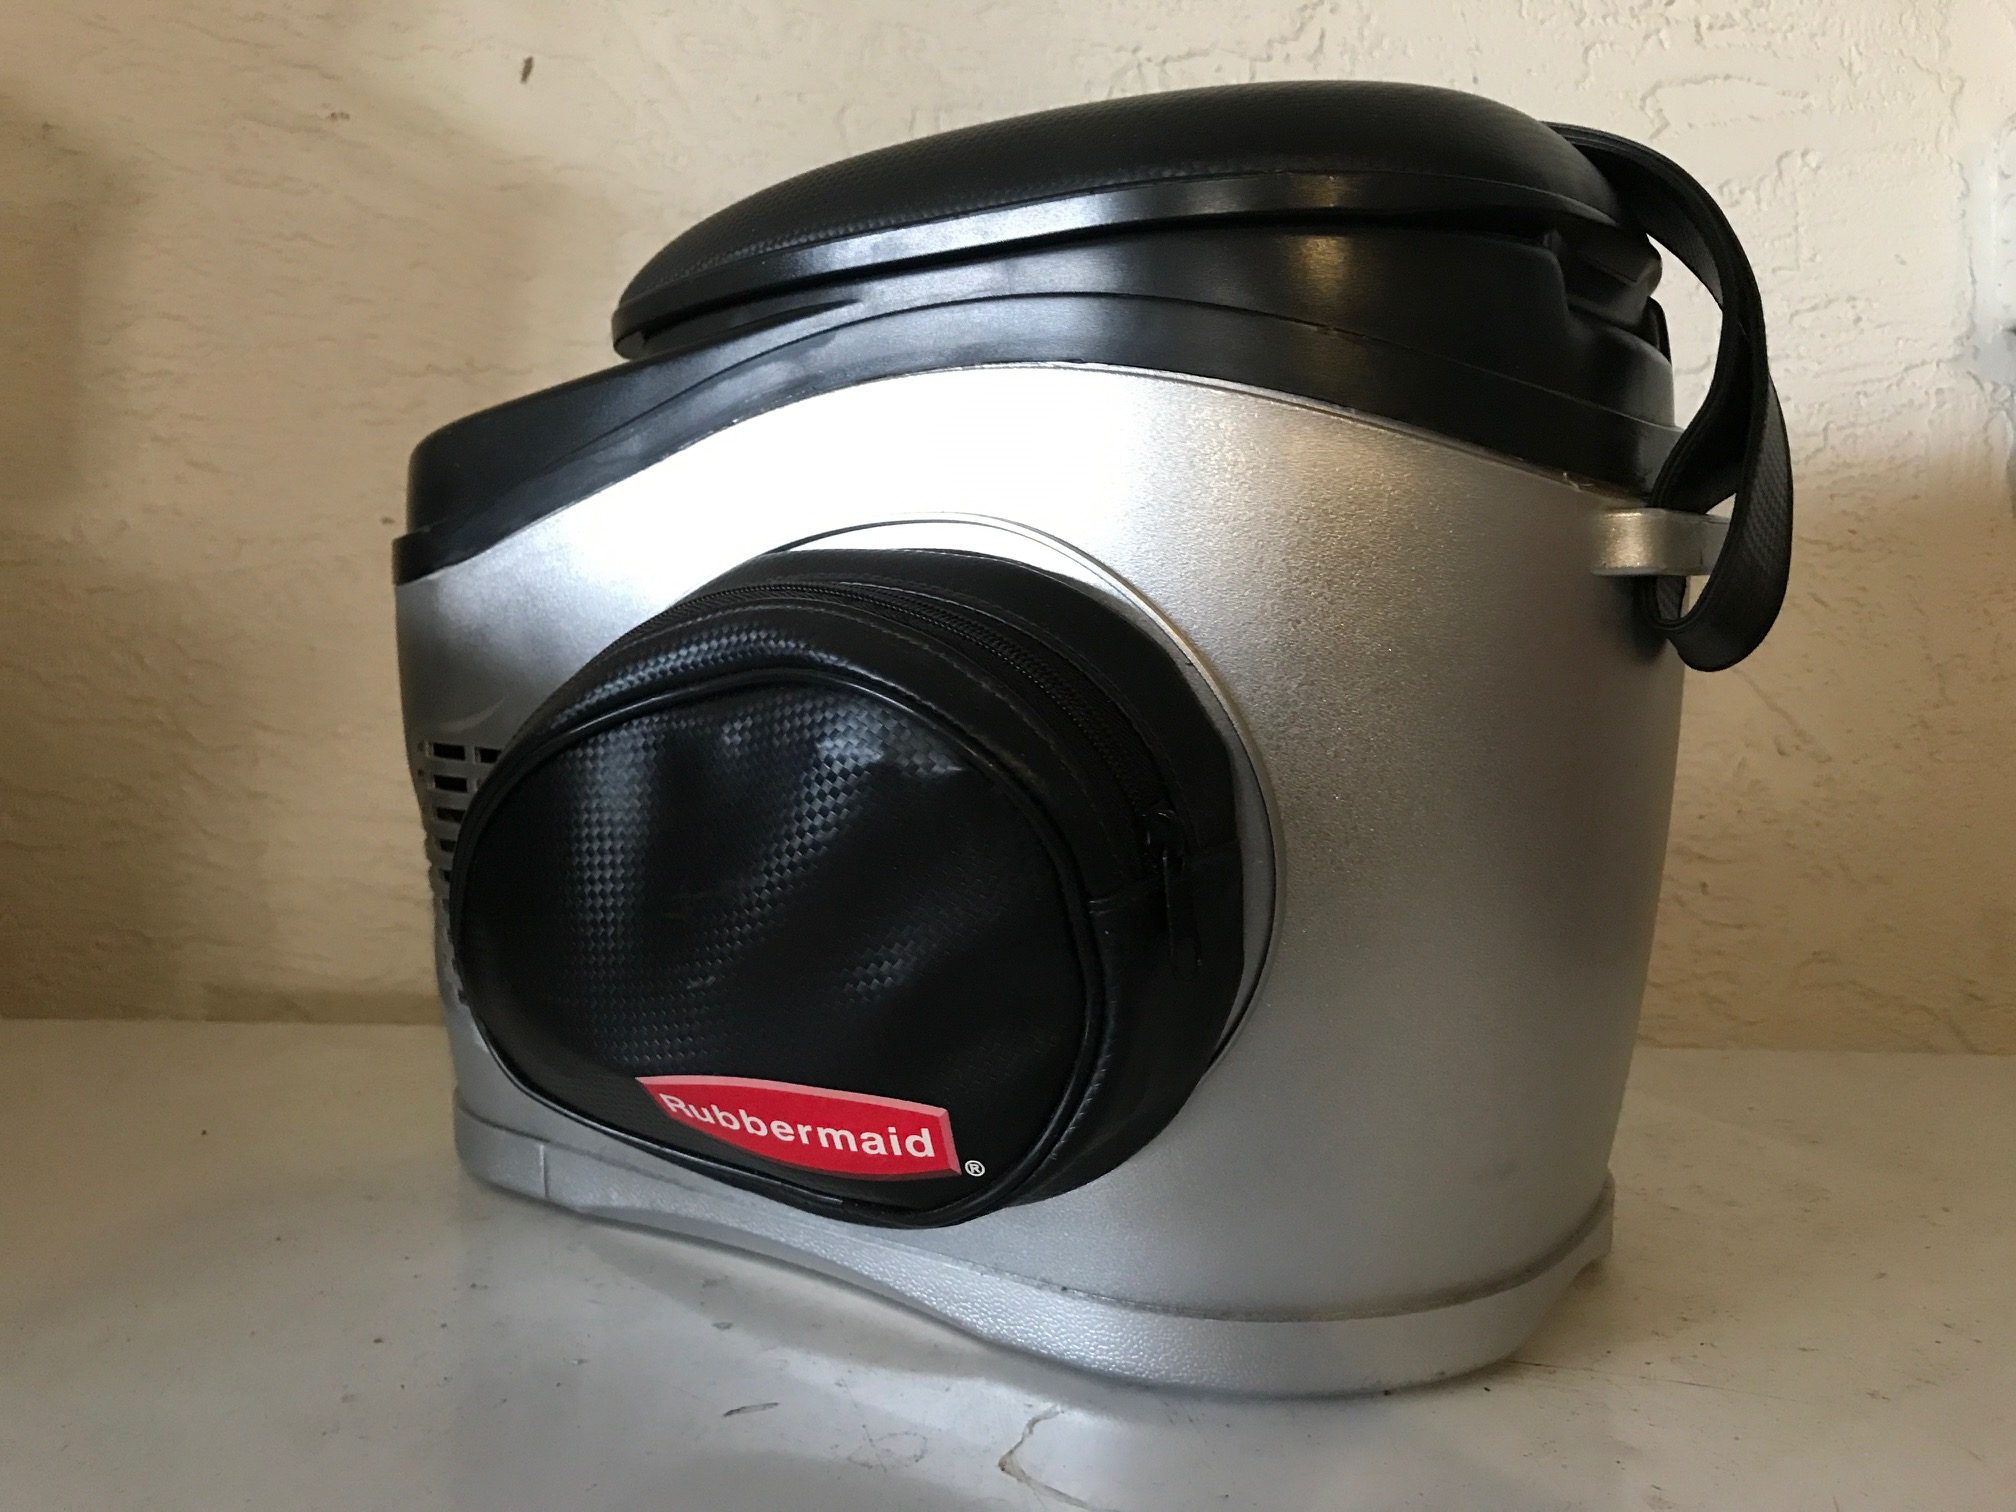 Rubbermaid Travel Coolers/Warmers 